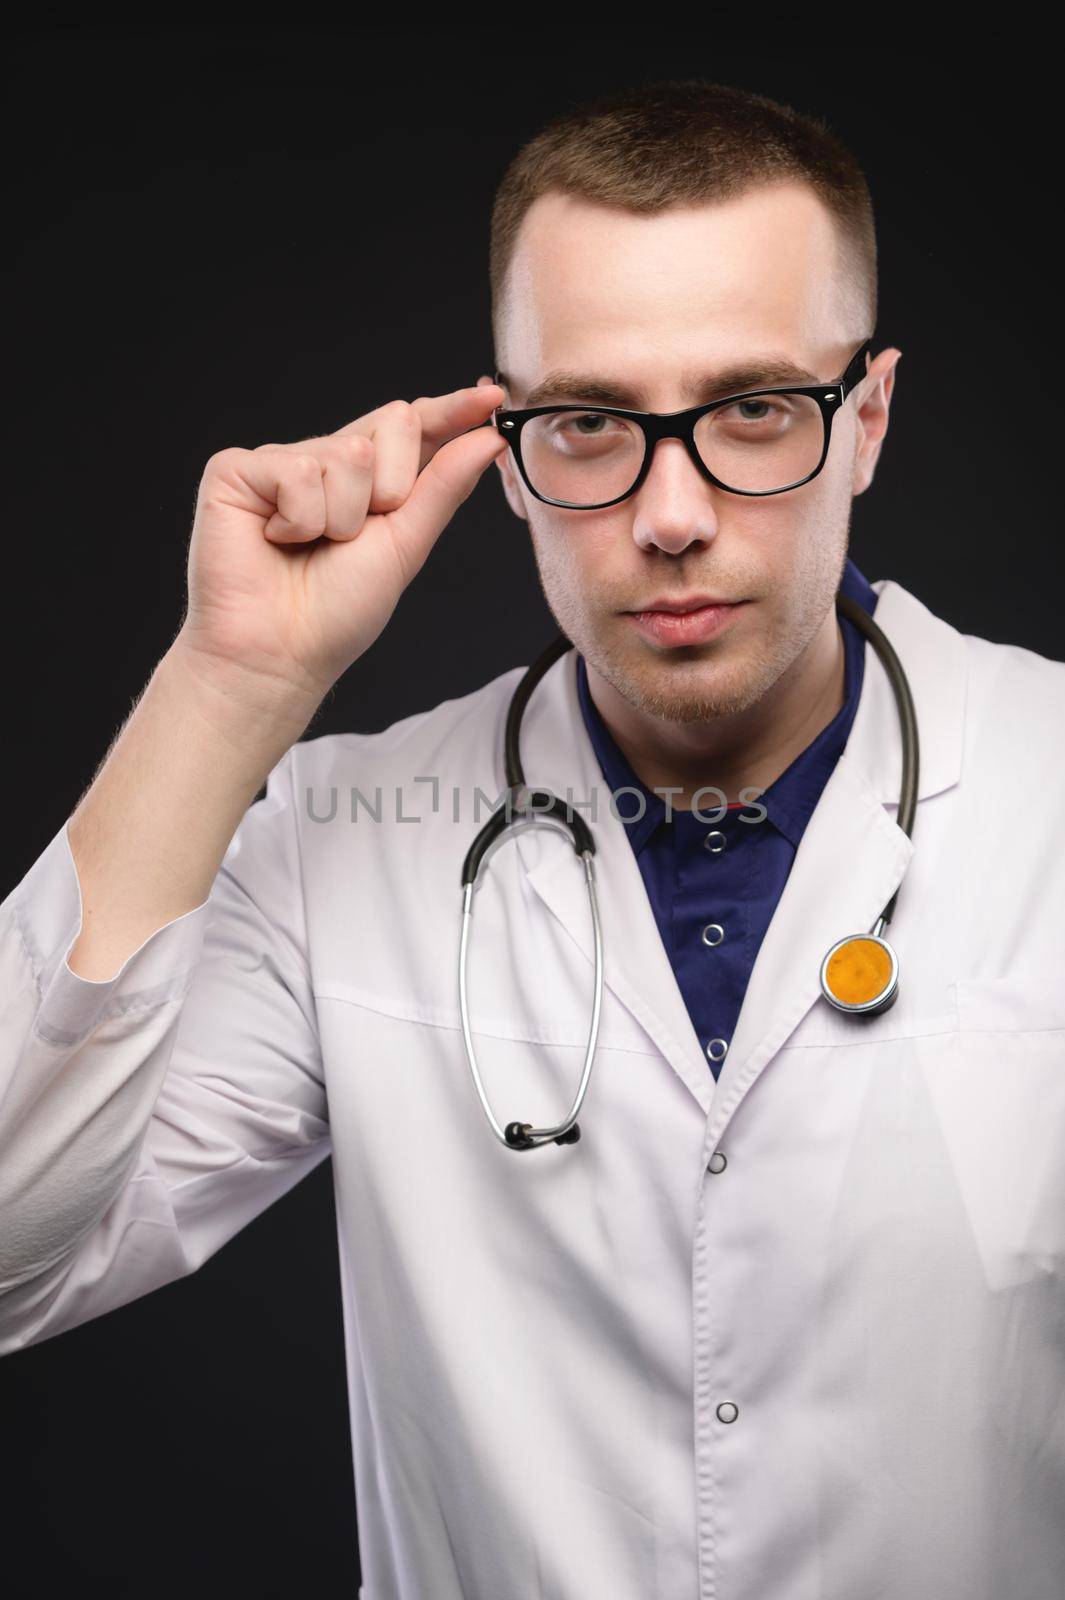 Portrait of a young Caucasian doctor in glasses and a white coat. Holds glasses and looks slyly at the camera by yanik88